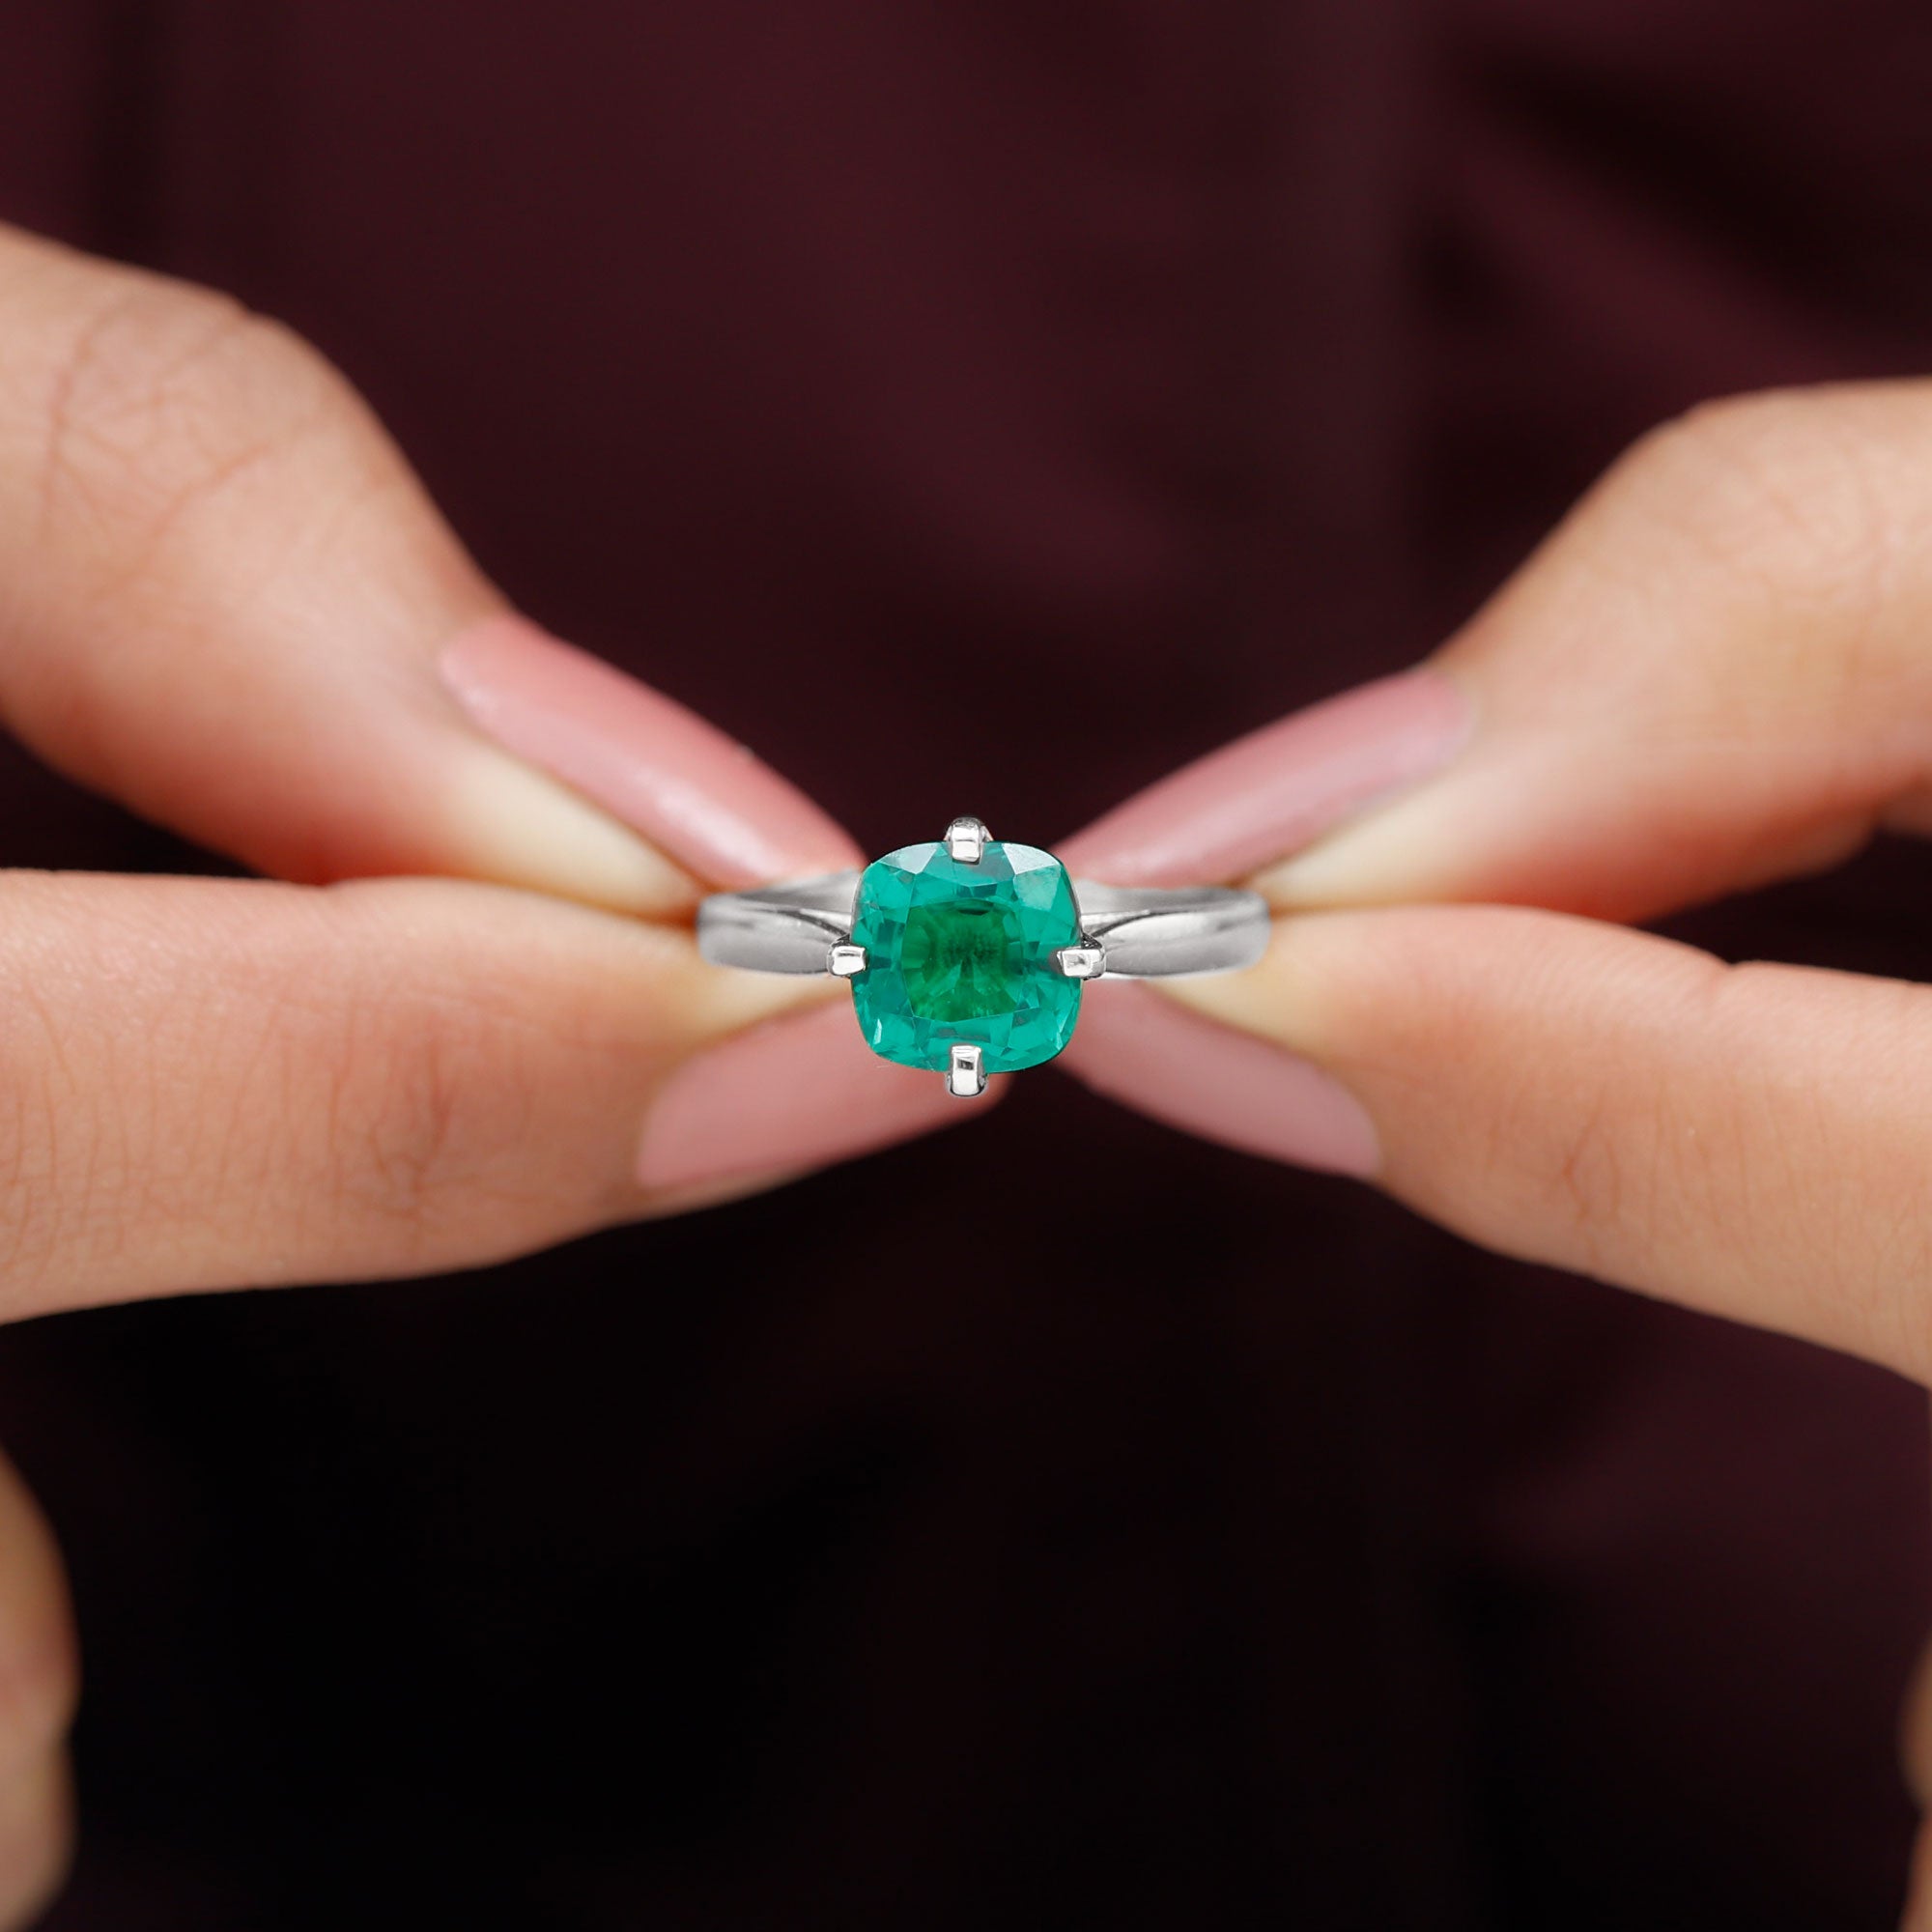 Cushion Cut Lab Grown Emerald Solitaire Engagement Ring Lab Created Emerald - ( AAAA ) - Quality - Rosec Jewels